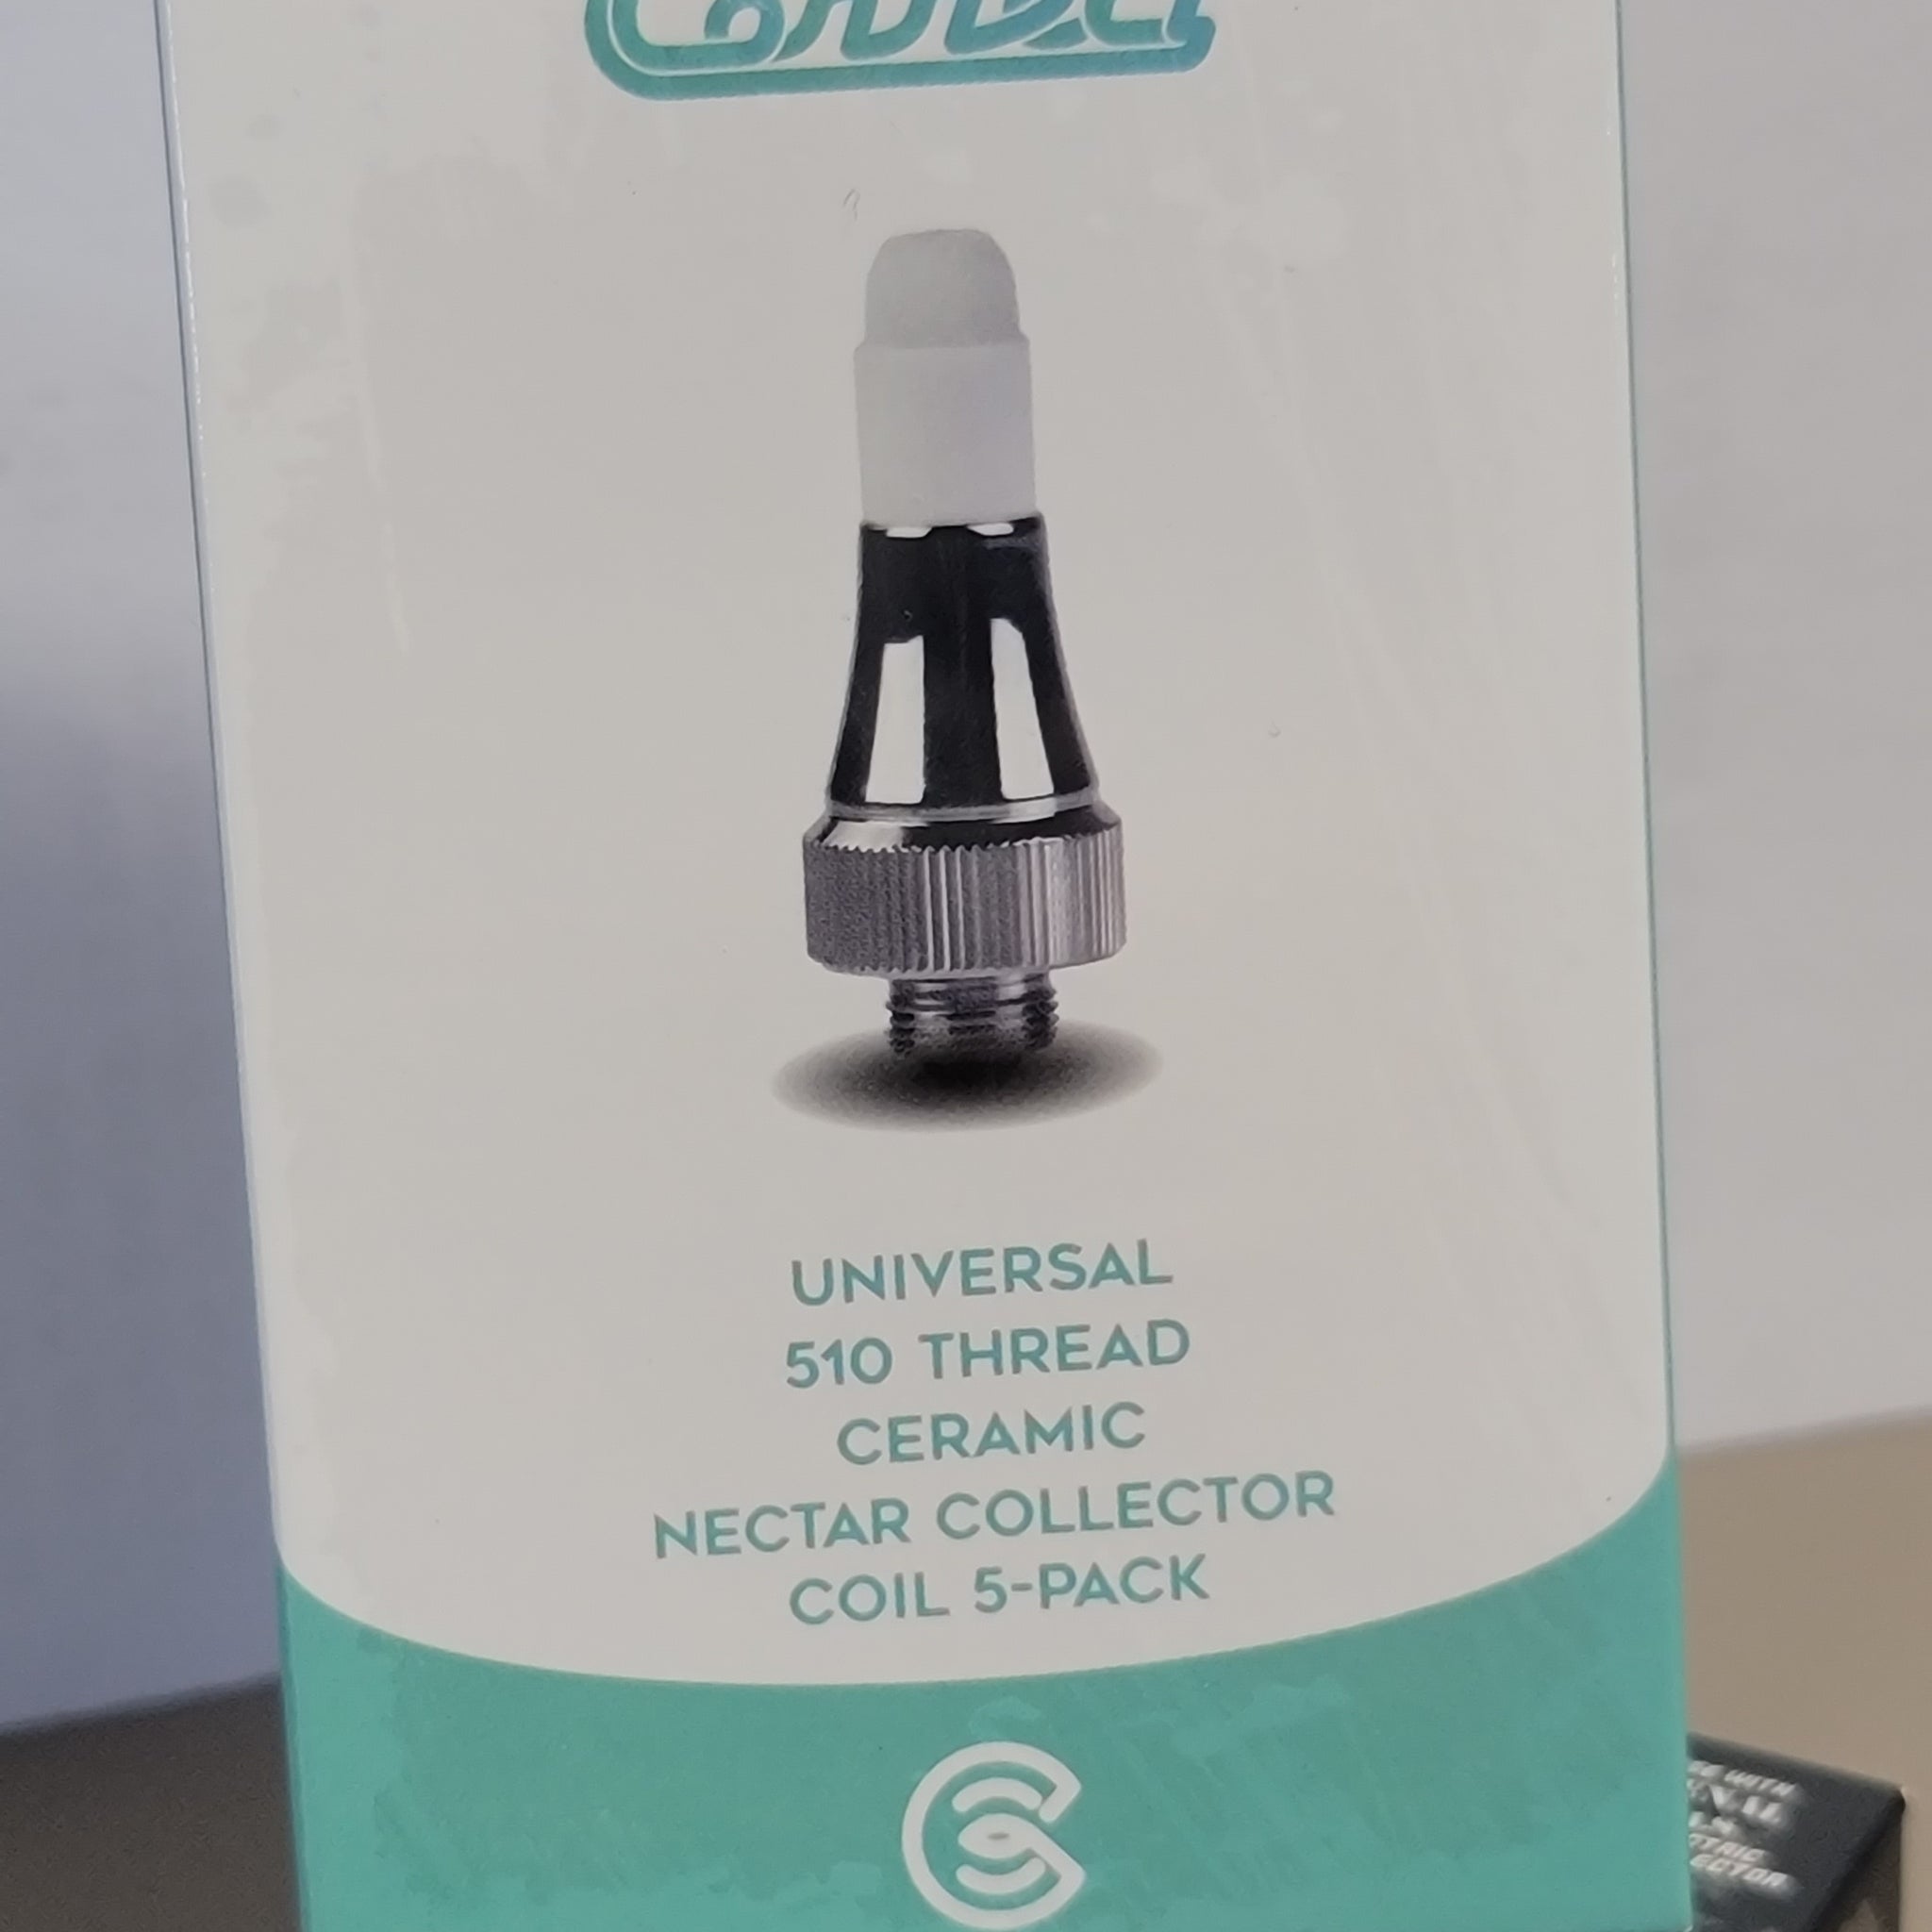 Connect Nectar Collector Coil (5) packs